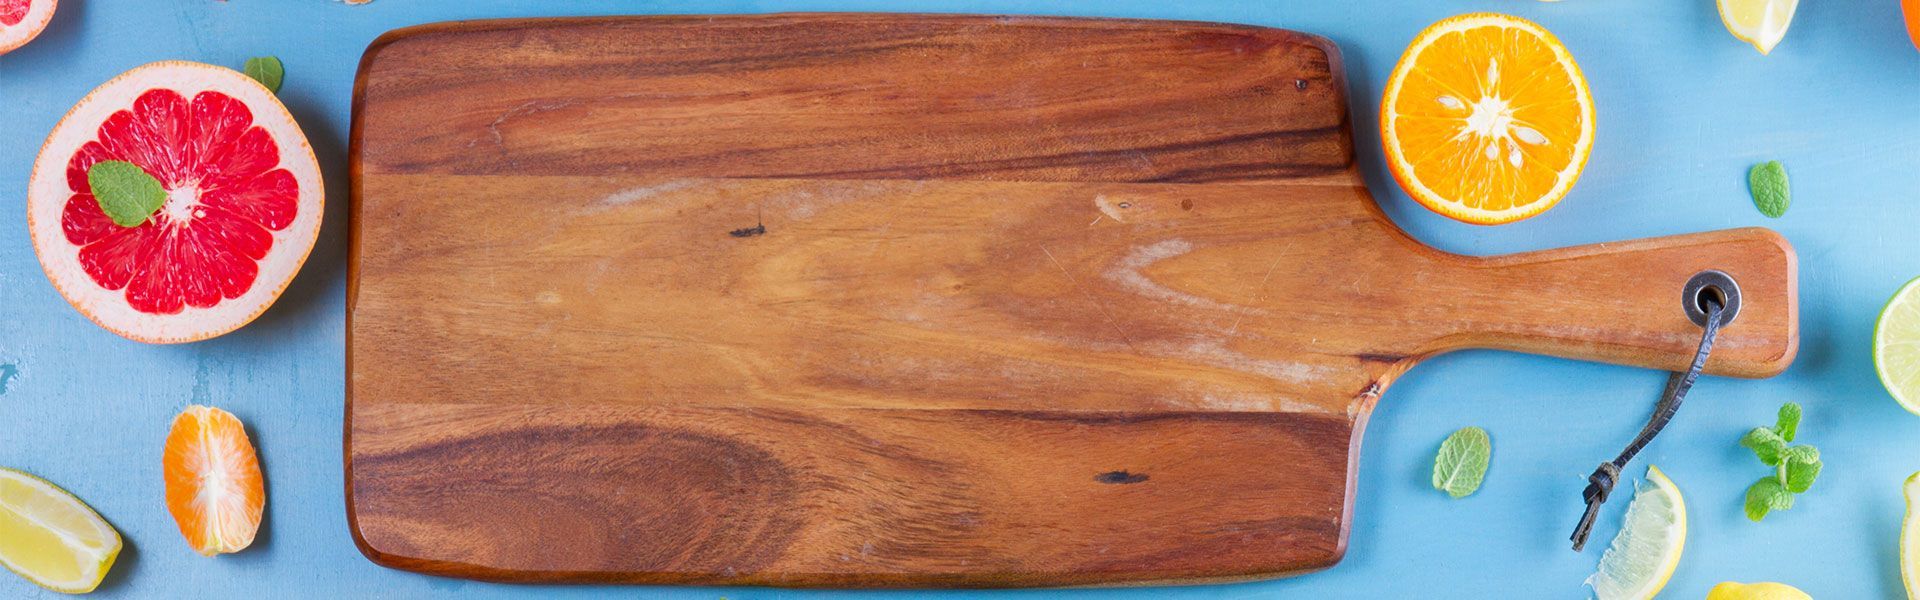 A wooden cutting board surrounded by fruit on a blue table.